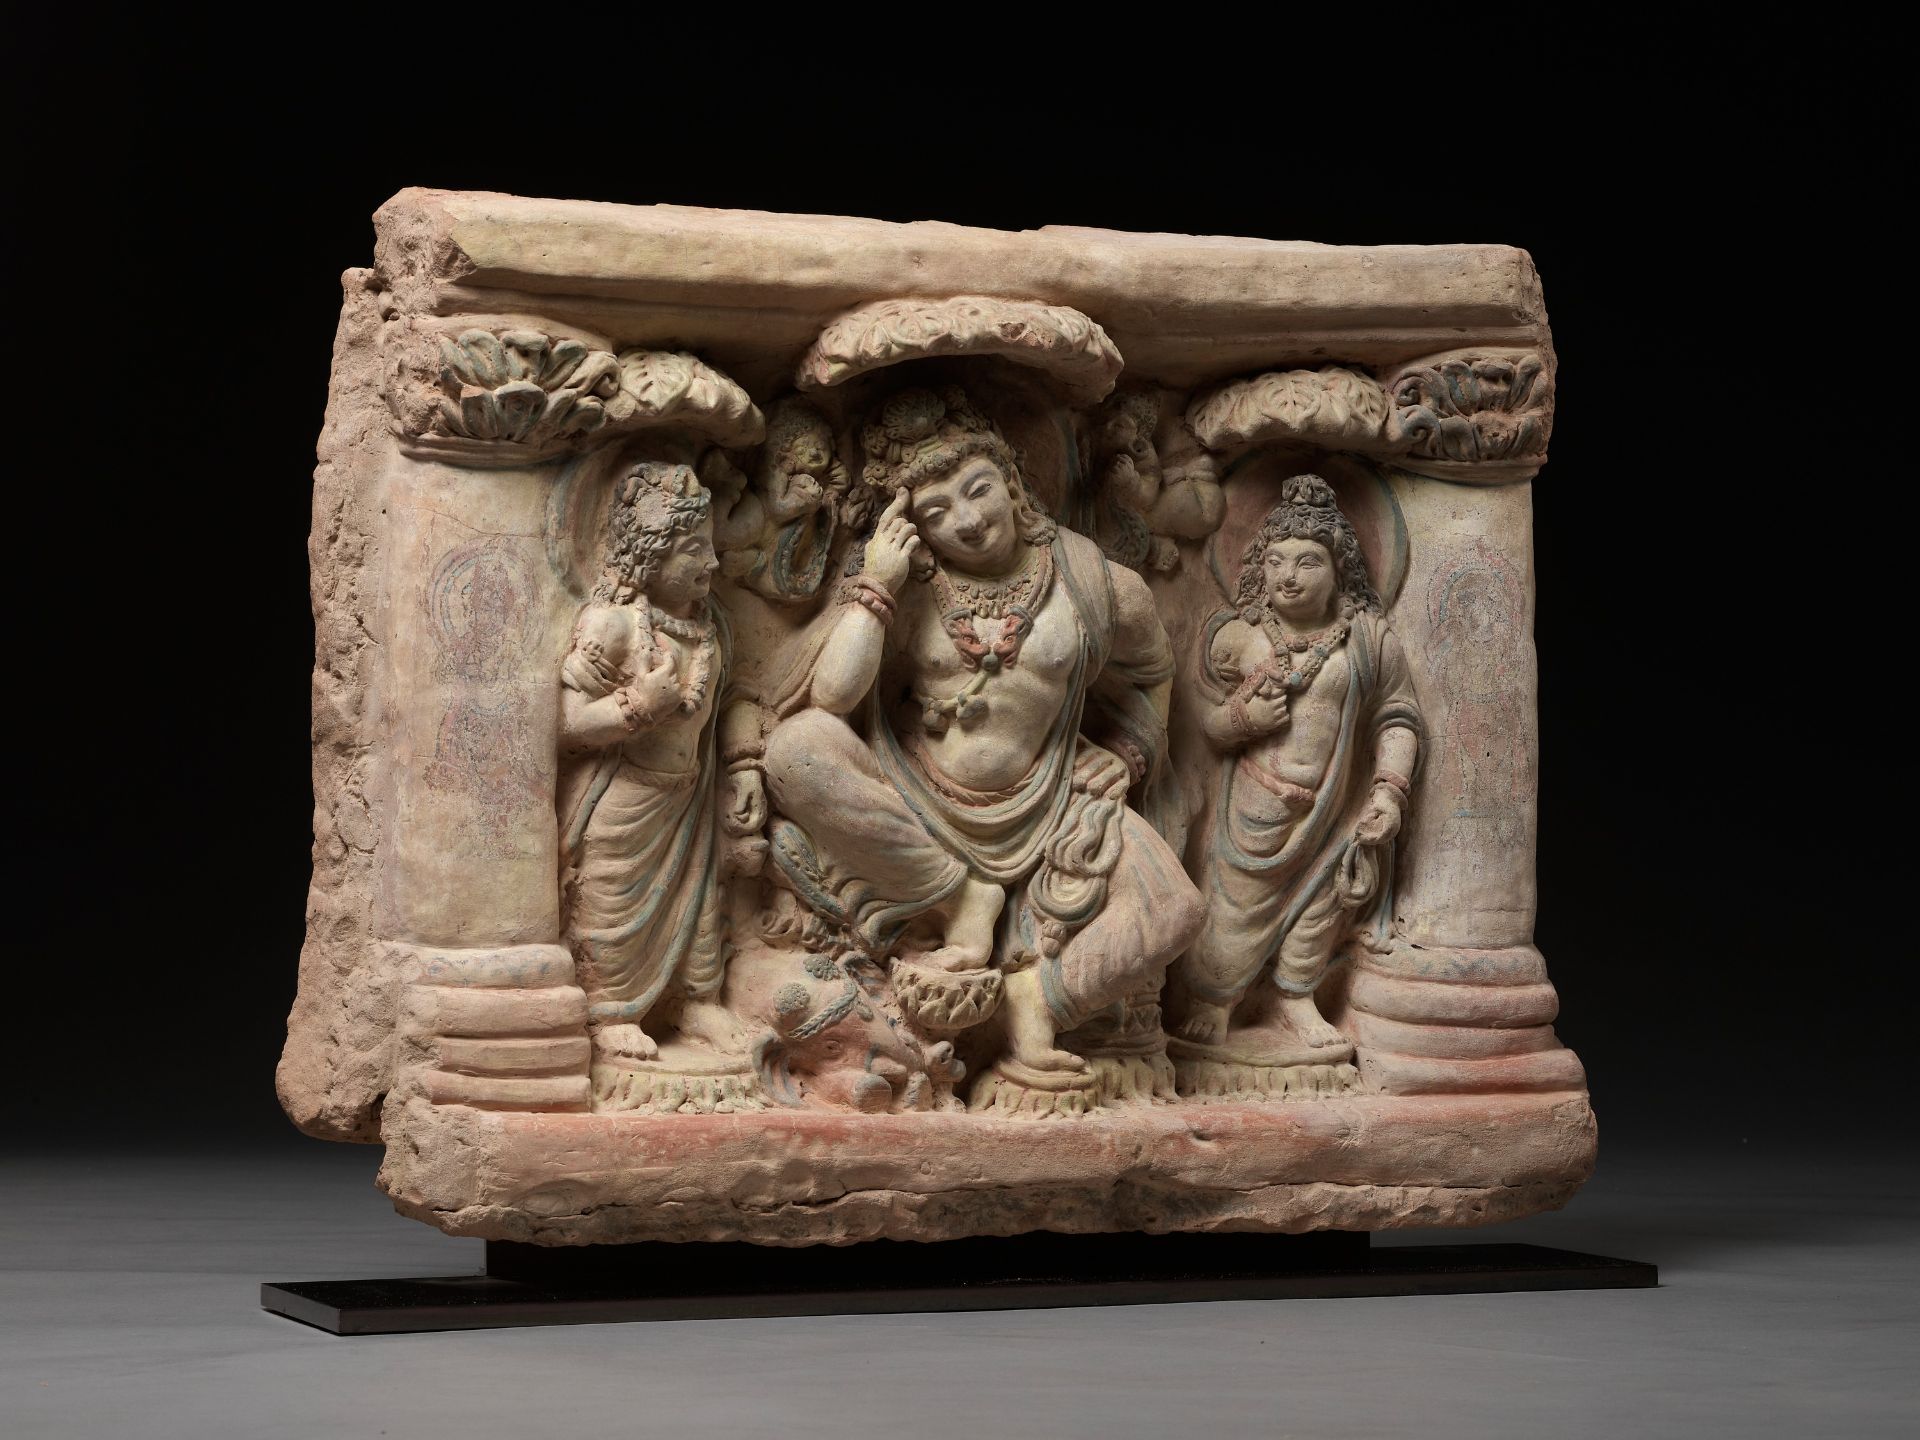 A TERRACOTTA RELIEF OF A THINKING PRINCE SIDDHARTA UNDER THE BODHI TREE, ANCIENT REGION OF GANDHARA - Image 19 of 19